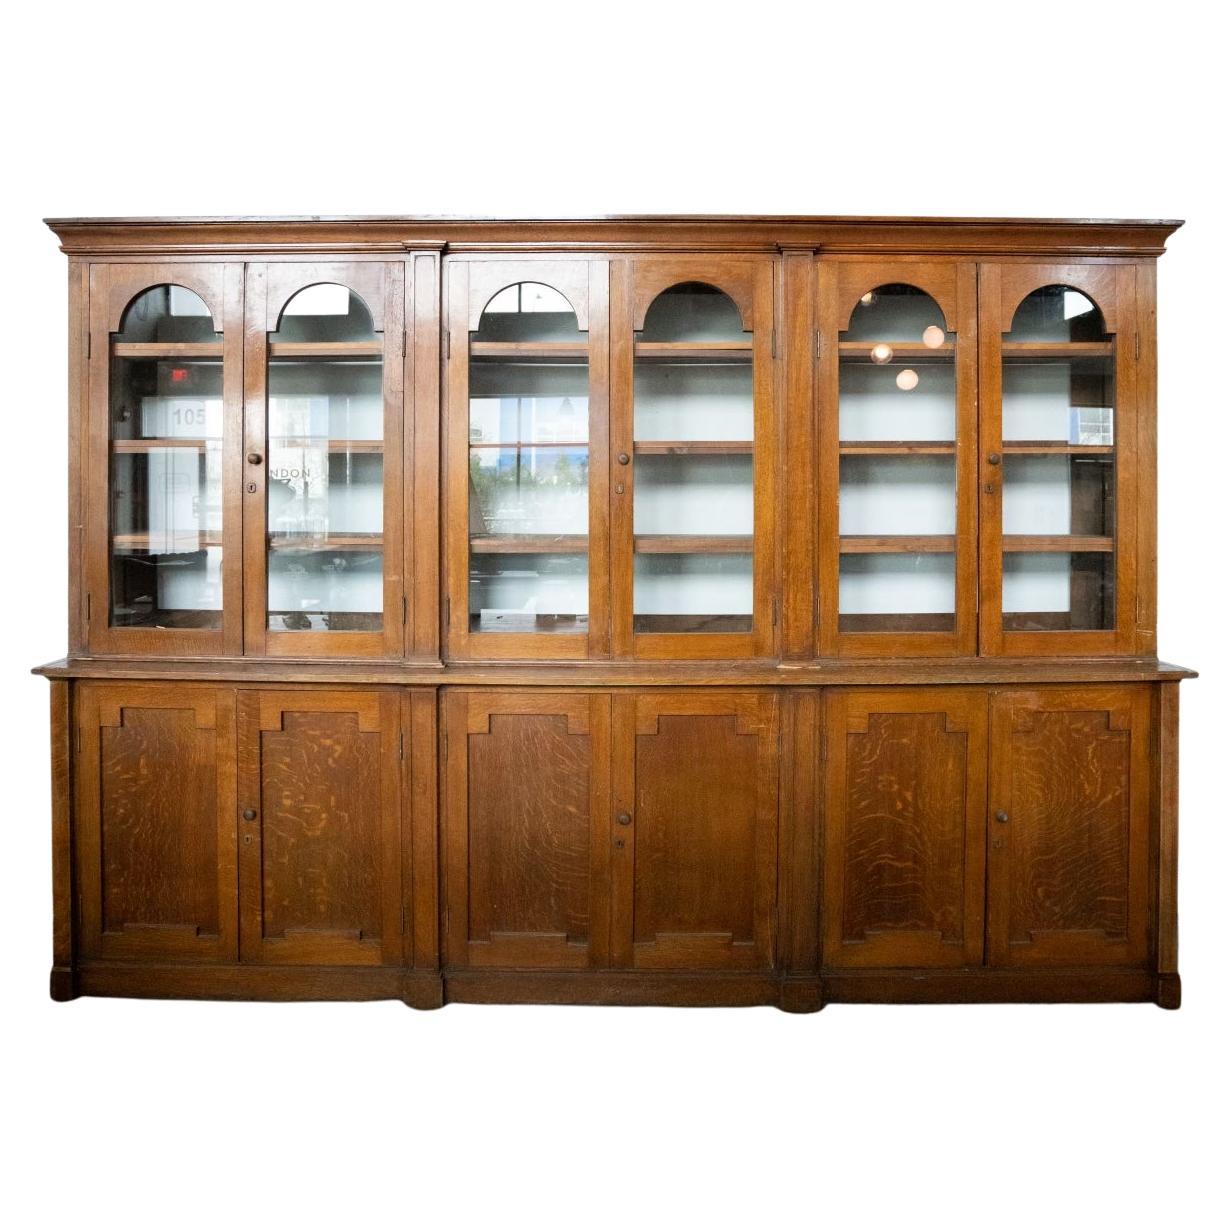 19th Century Oak Bookcase Dry Bar Cabinet For Sale